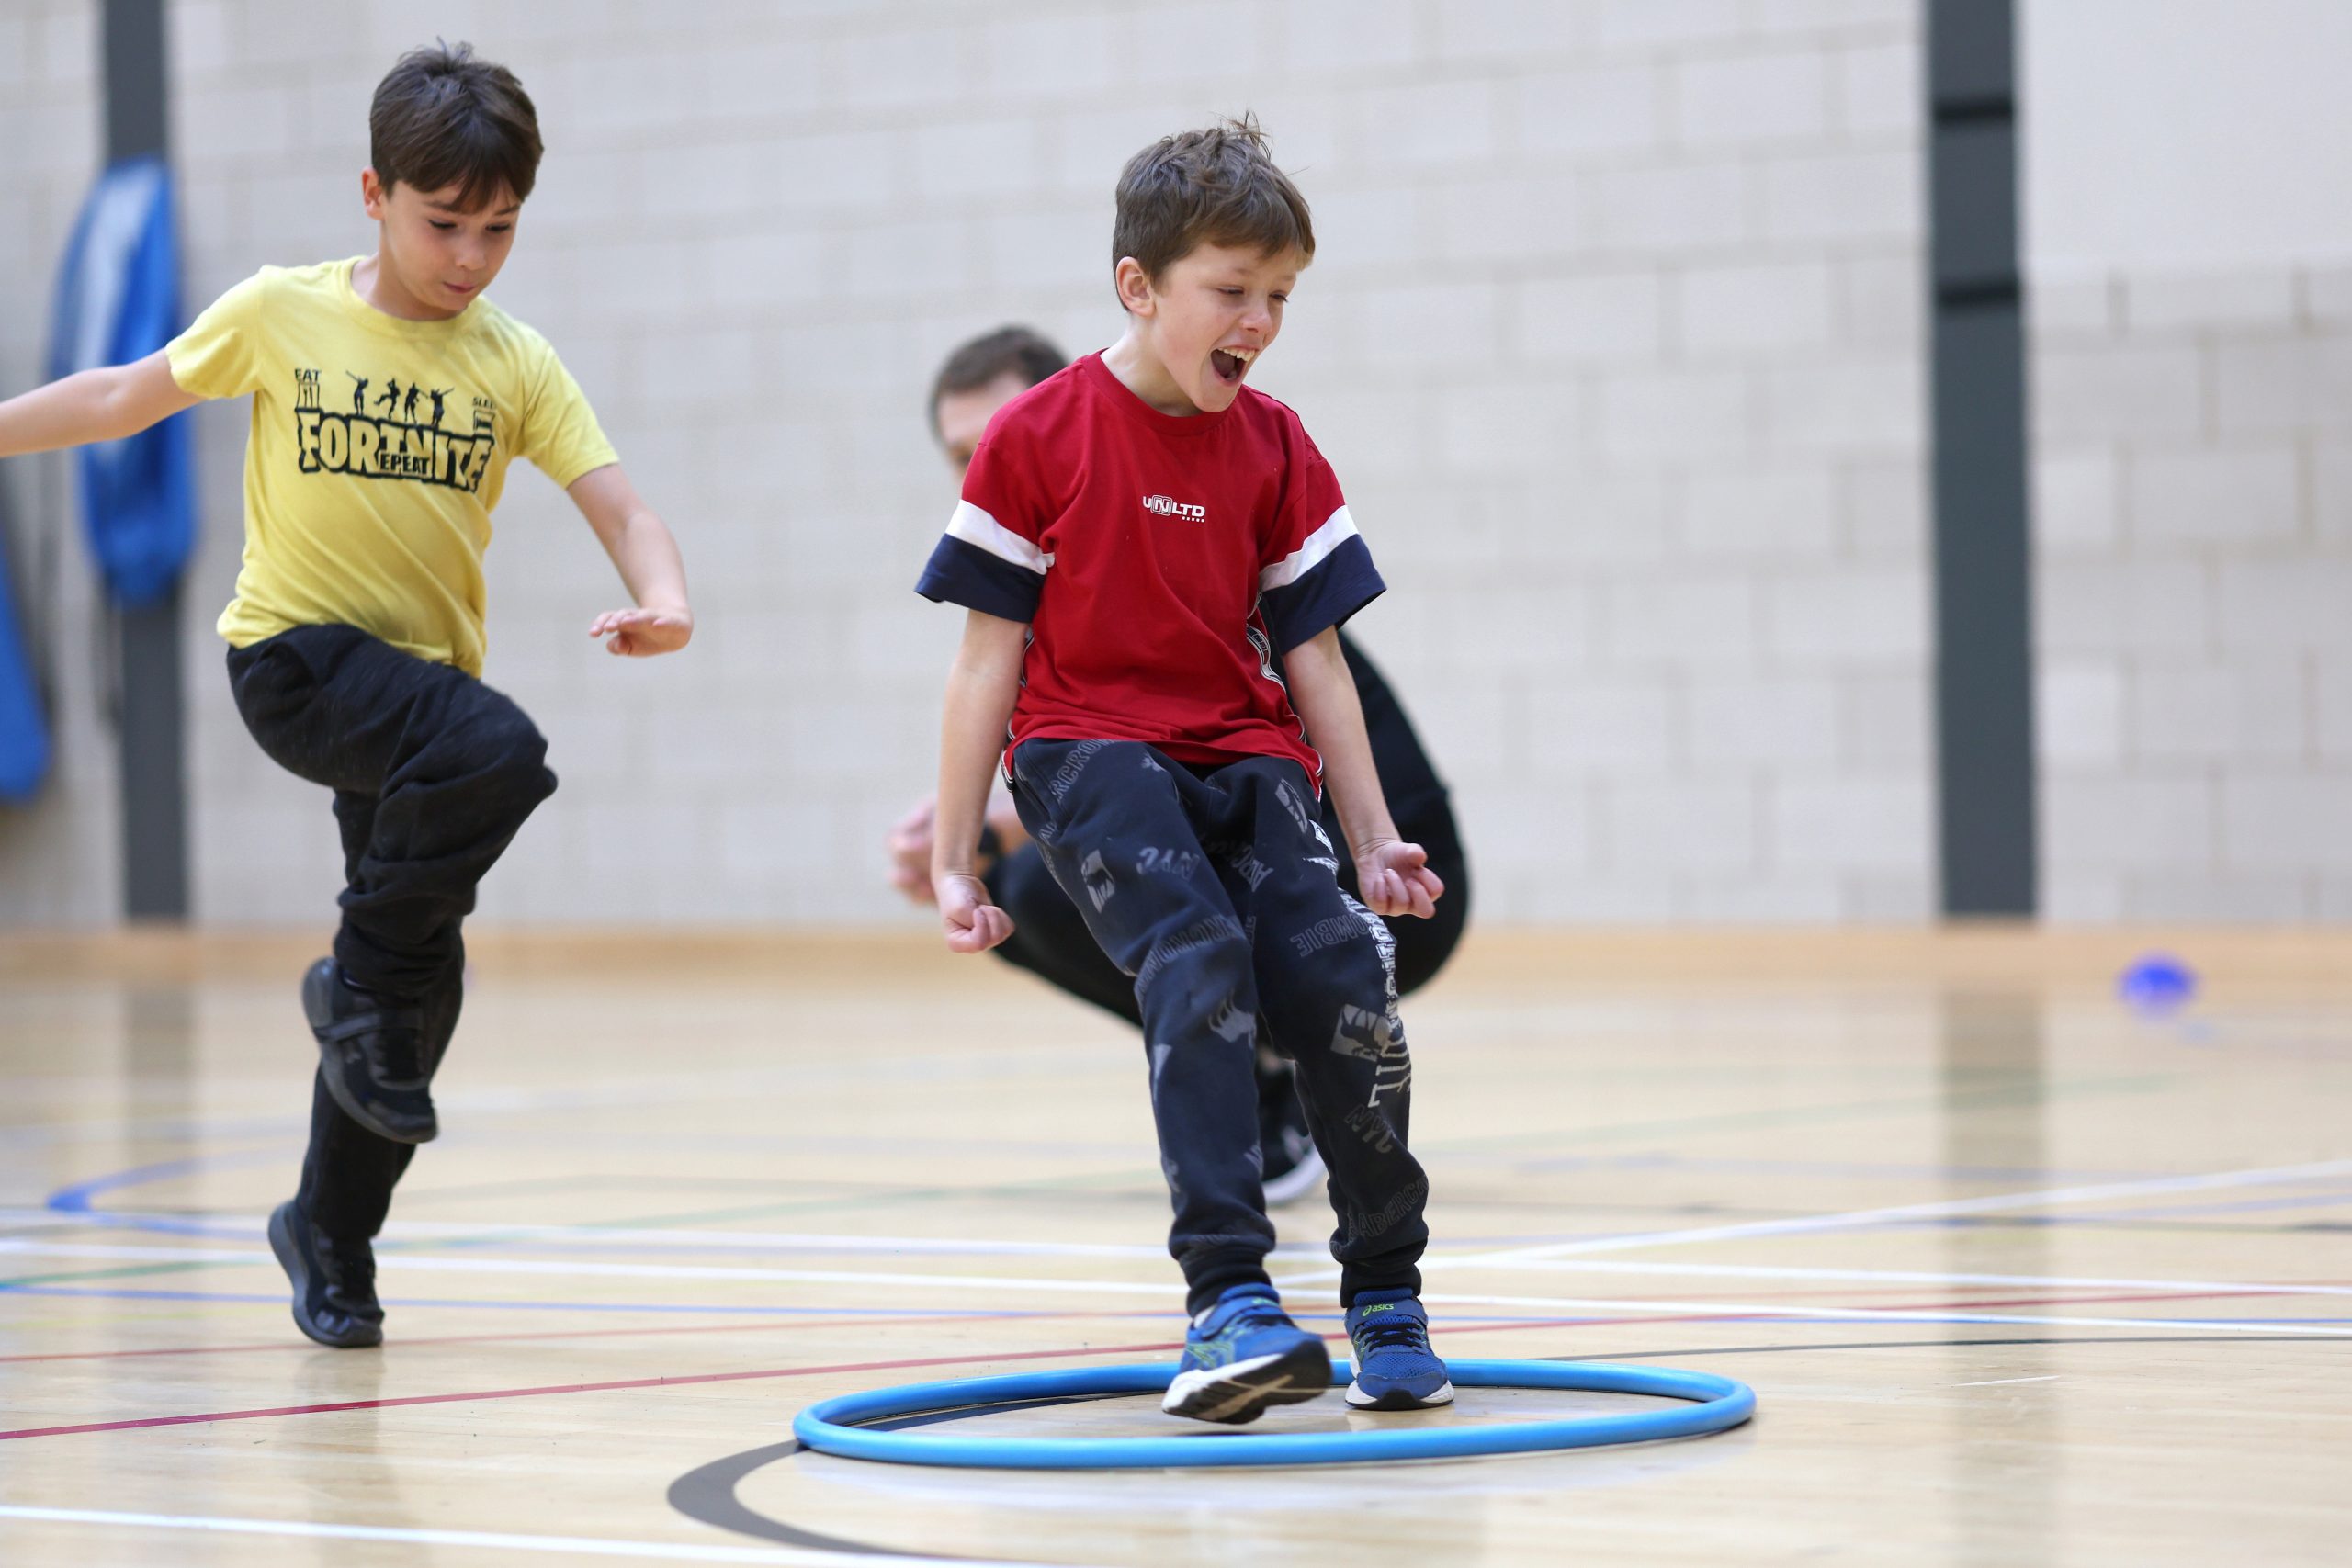 Youngsters enjoy fun games and healthy food at holiday camp